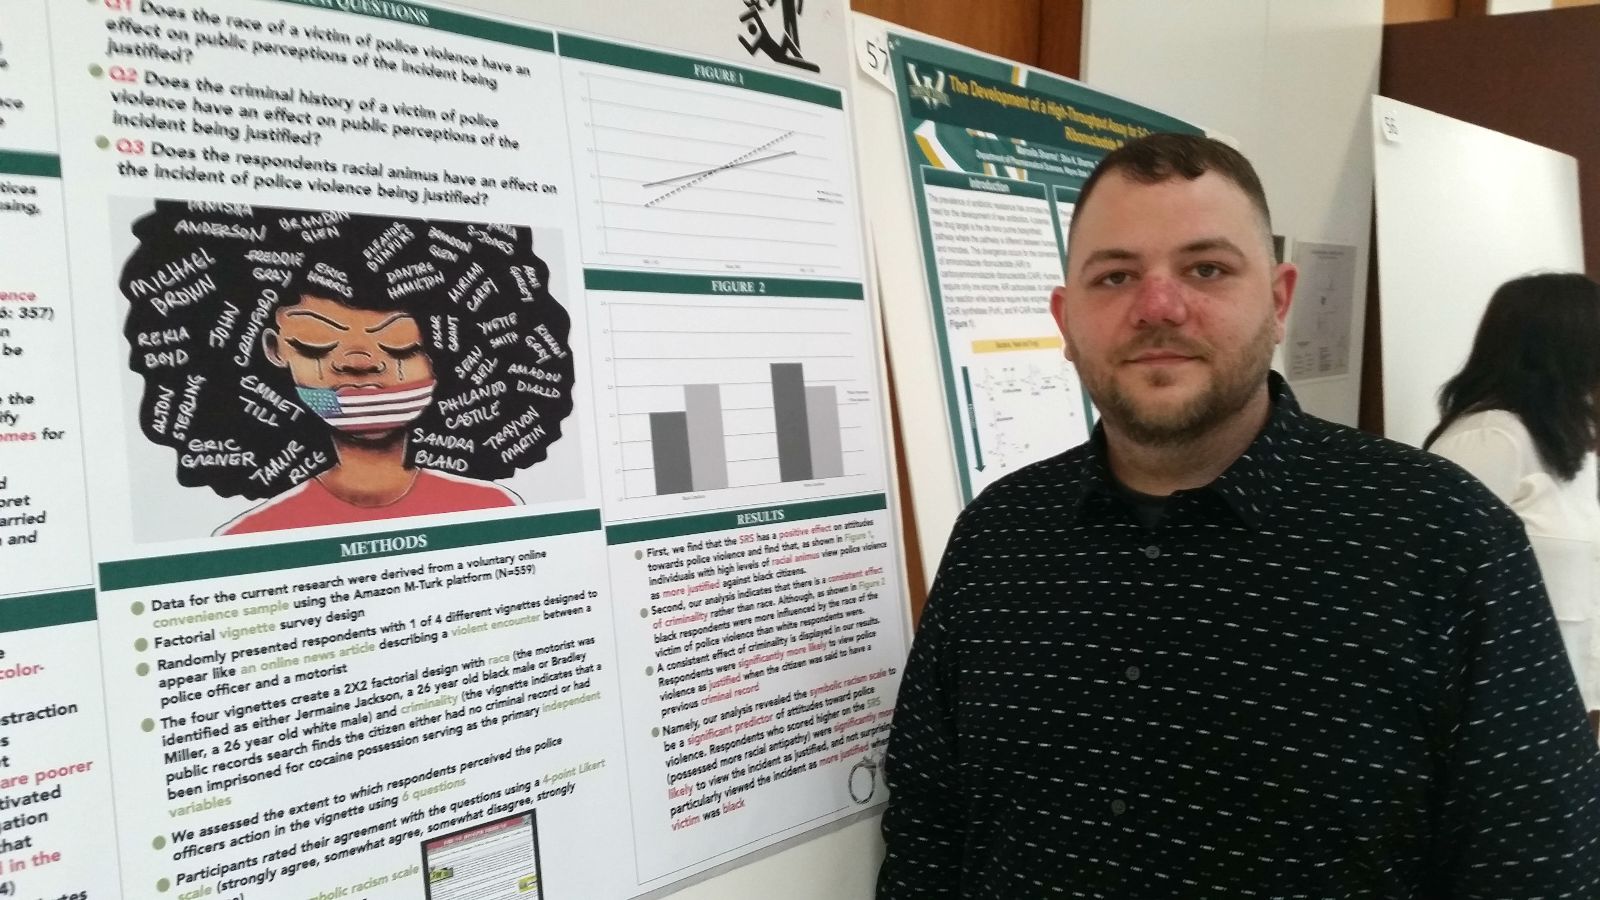 Jason Smith: Black, Blue, and Blow: The Effect of Race and Criminal History on Perceptions of Police Violence